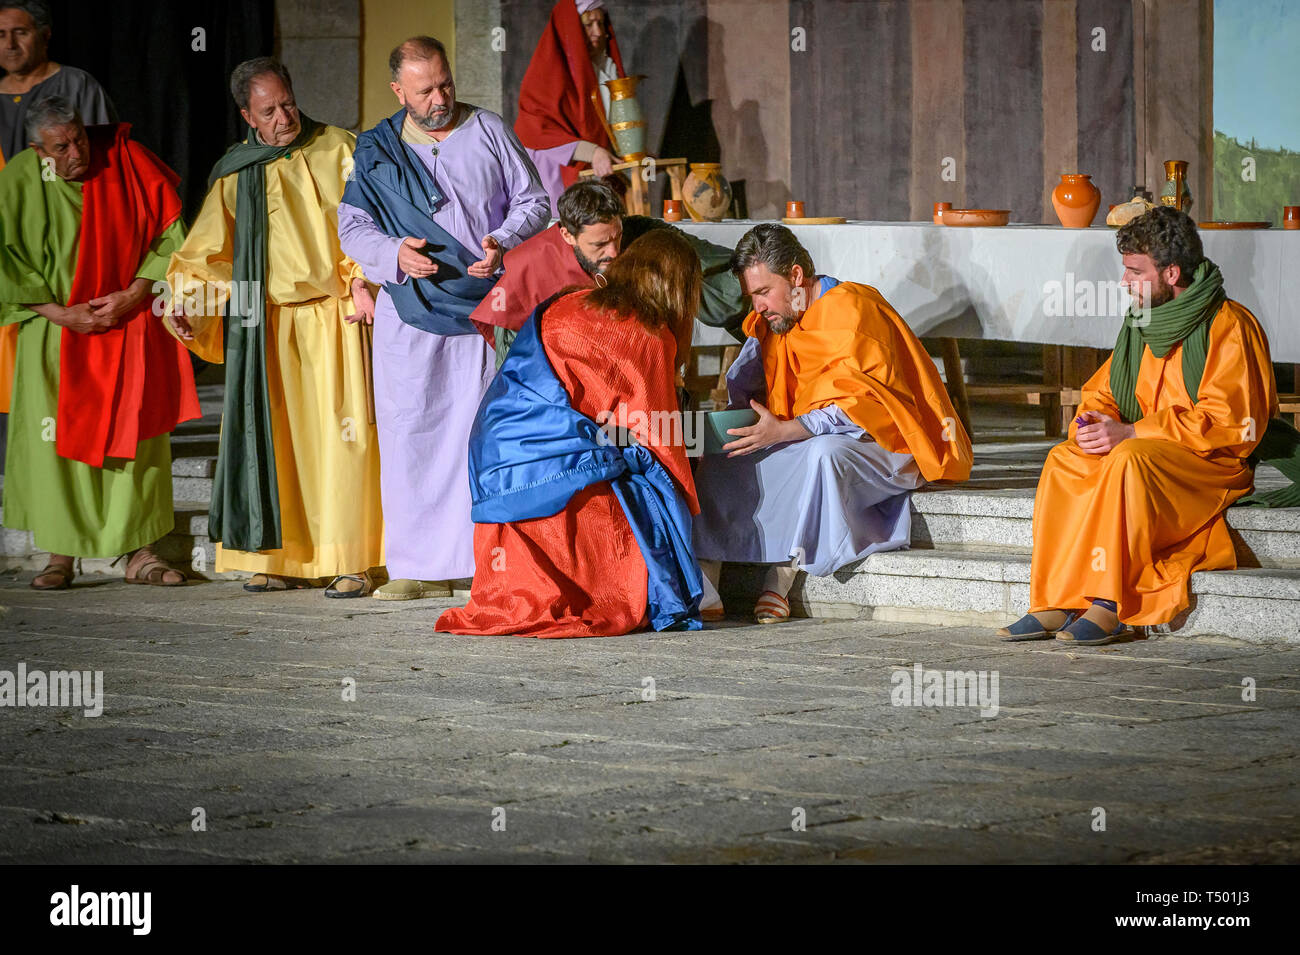 Brunete, Spain - April 11, 2019: Popular play of The Passion of Christ in the Plaza Mayor of the town. Jesus washes the feet of the apostles after the Stock Photo